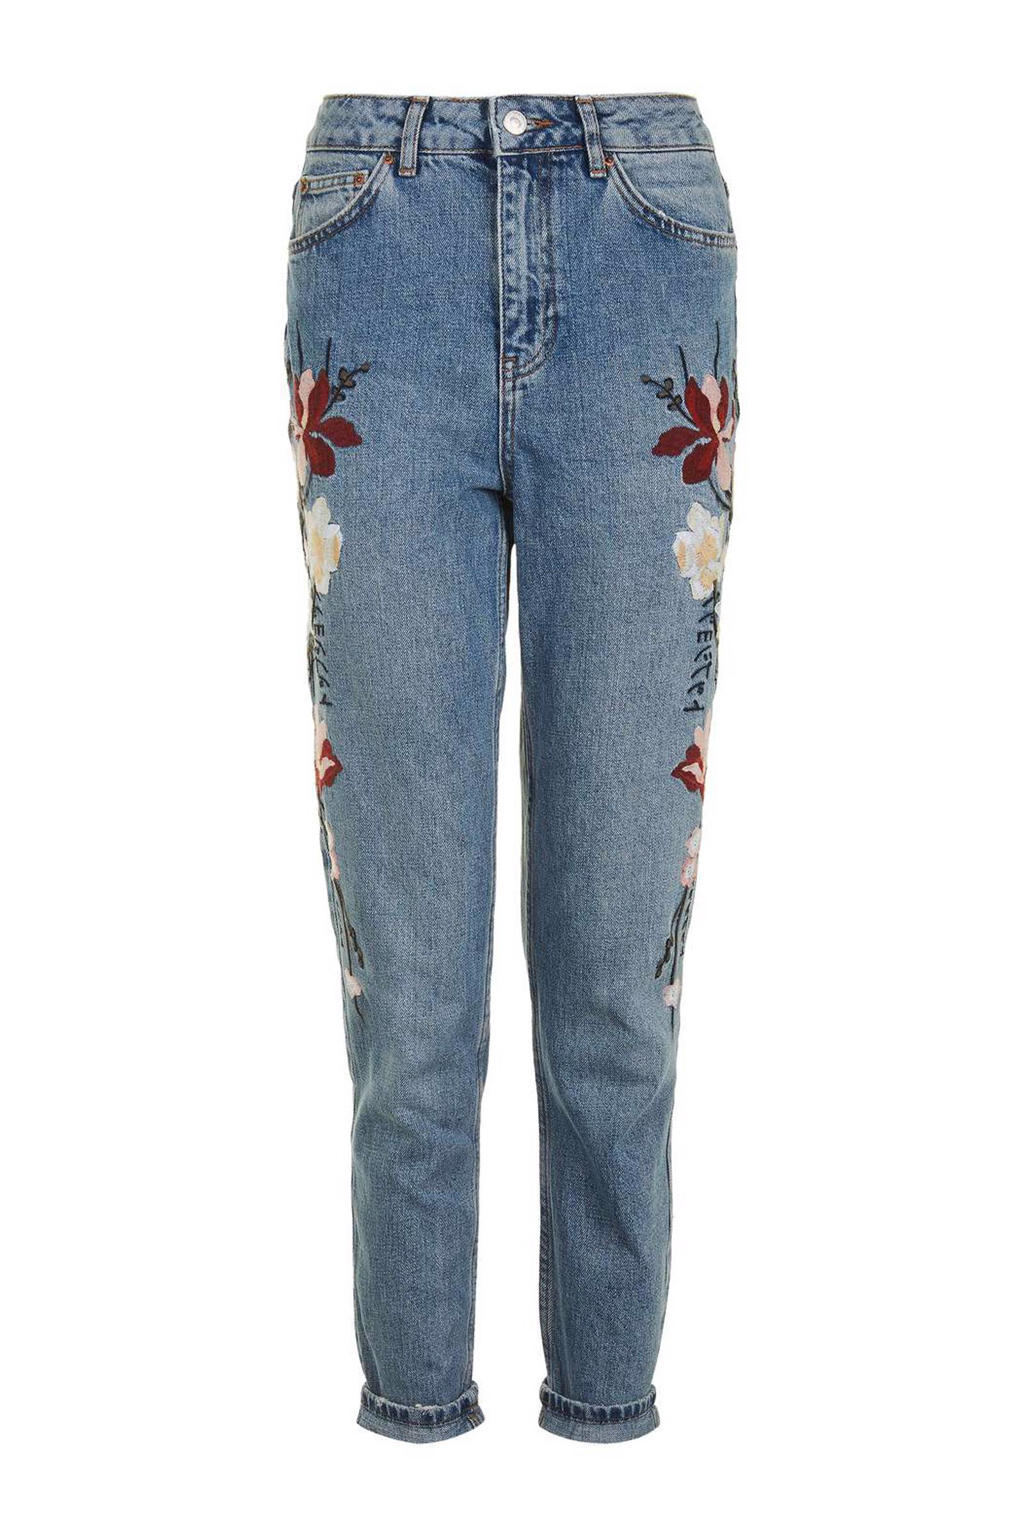 Topshop Mom high waisted jeans 30"